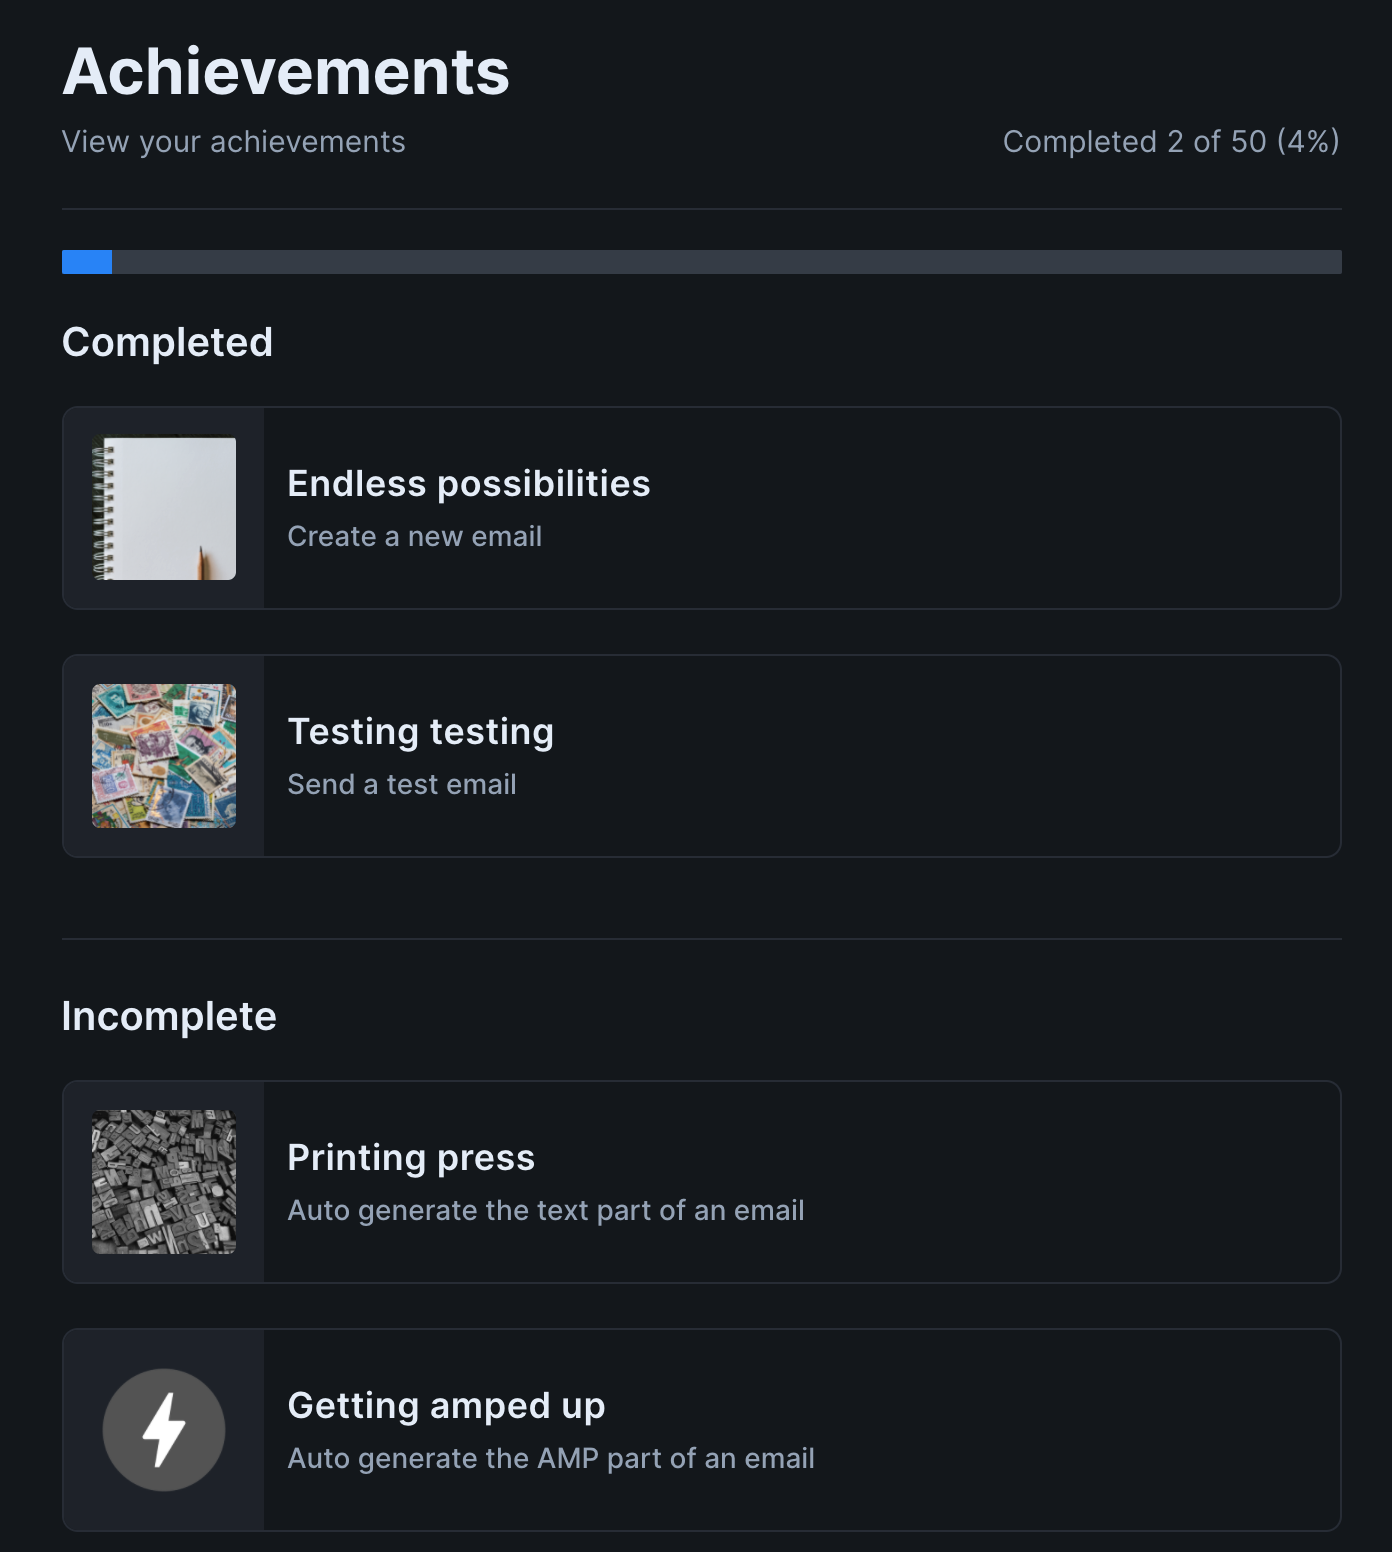 Screenshot of the first four achievements on the achievements page